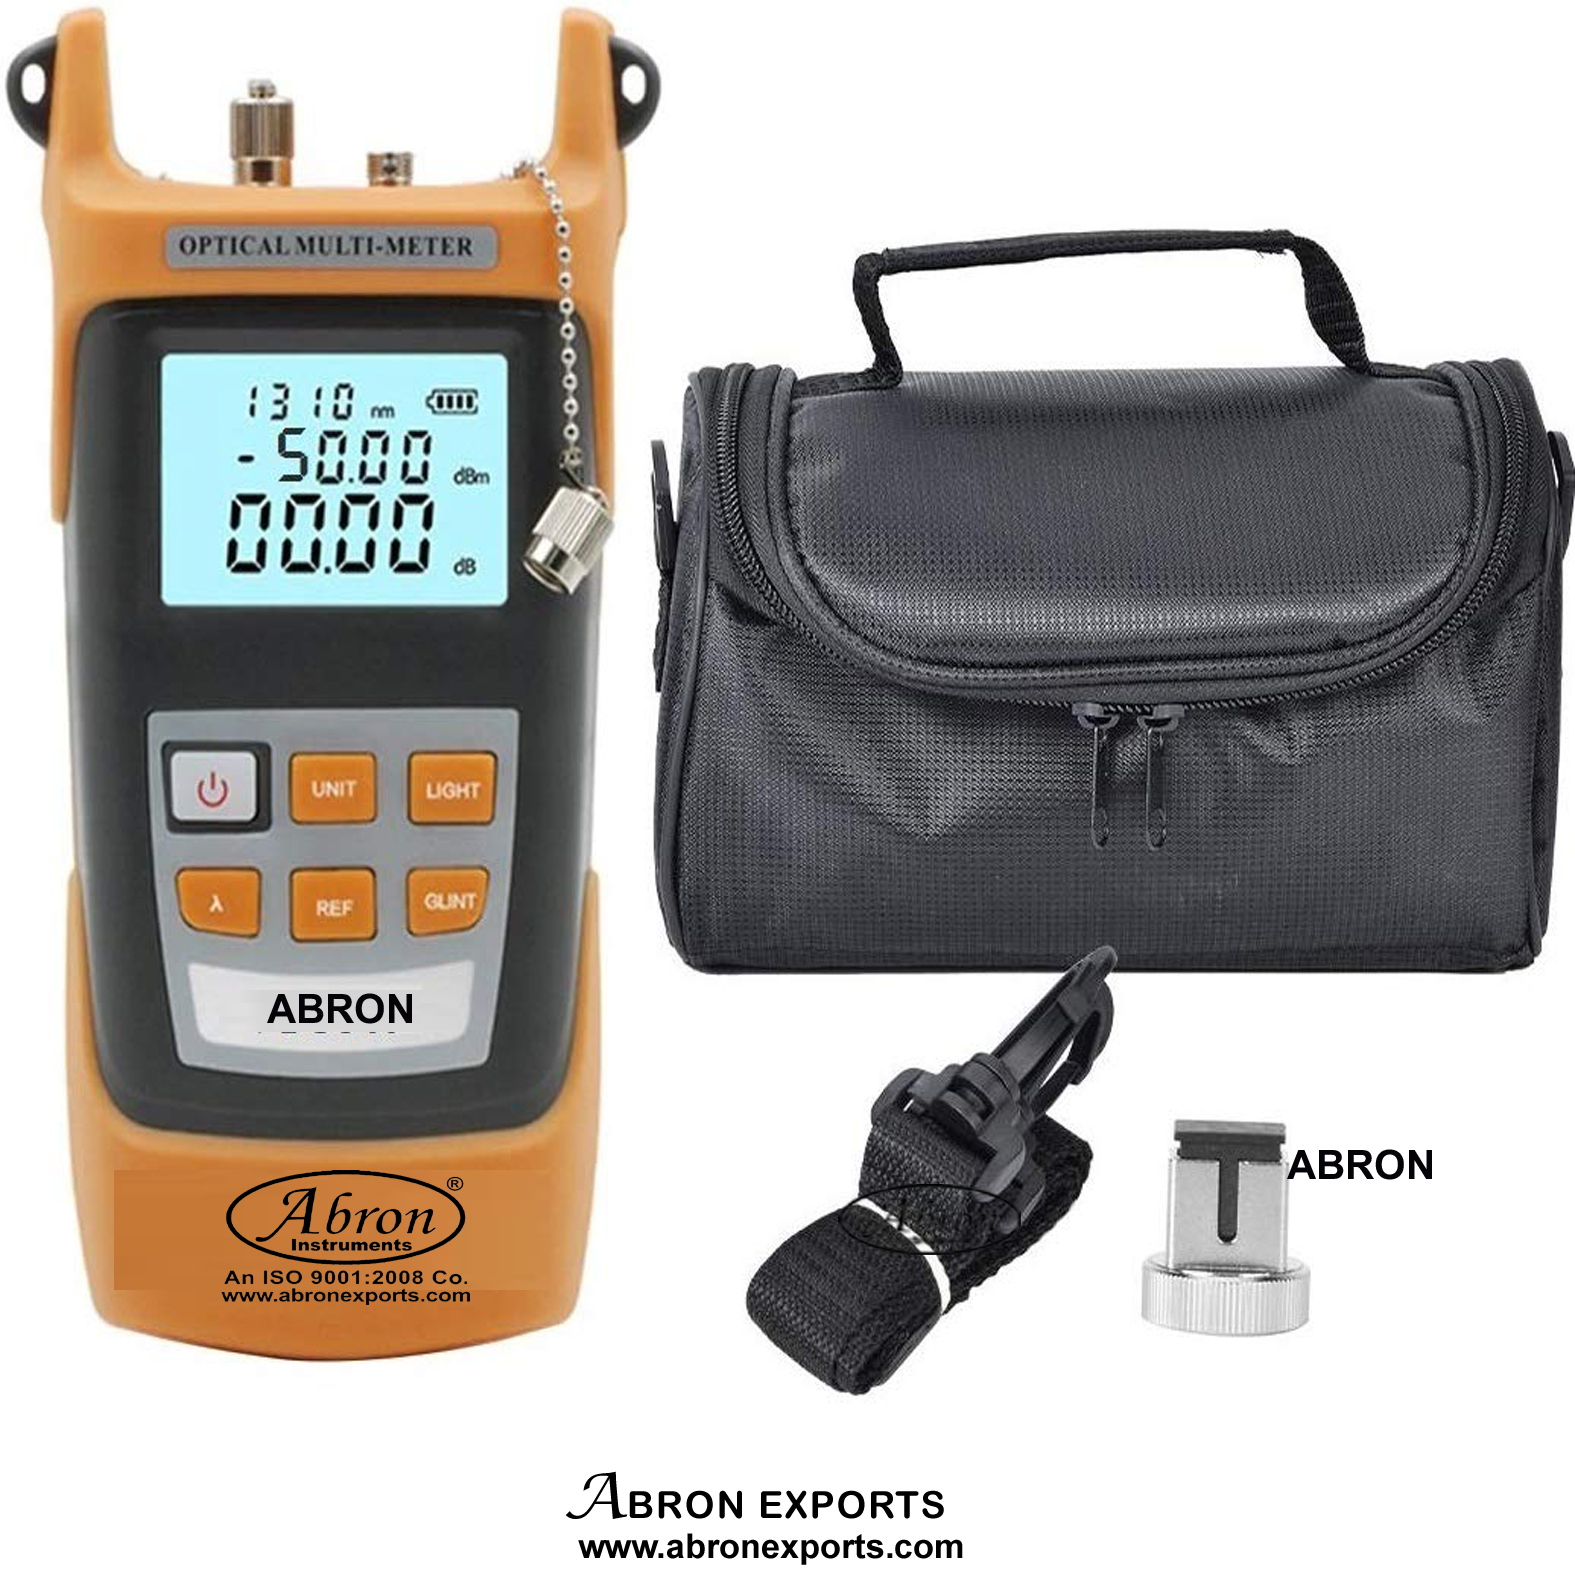 Cable fault locator testing fibre optics Optical Power 	Meter with Vfl 10mw -50+20dbm Tester AE-1217-F	